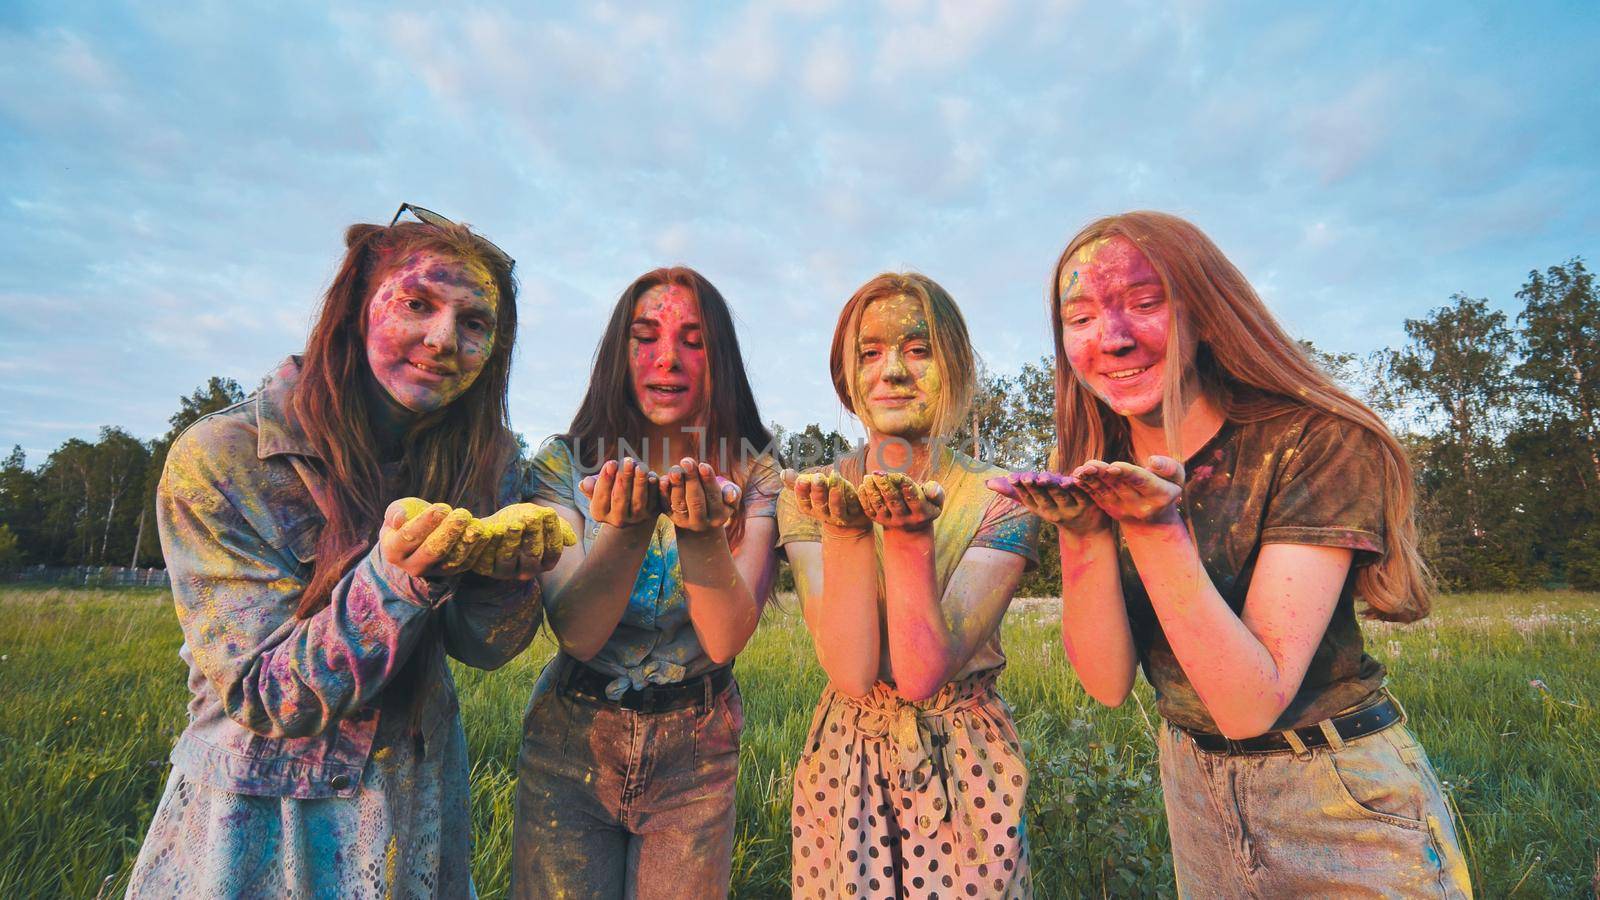 Funny girls are sprinkled with multi-colored powder. Holi holiday. by DovidPro